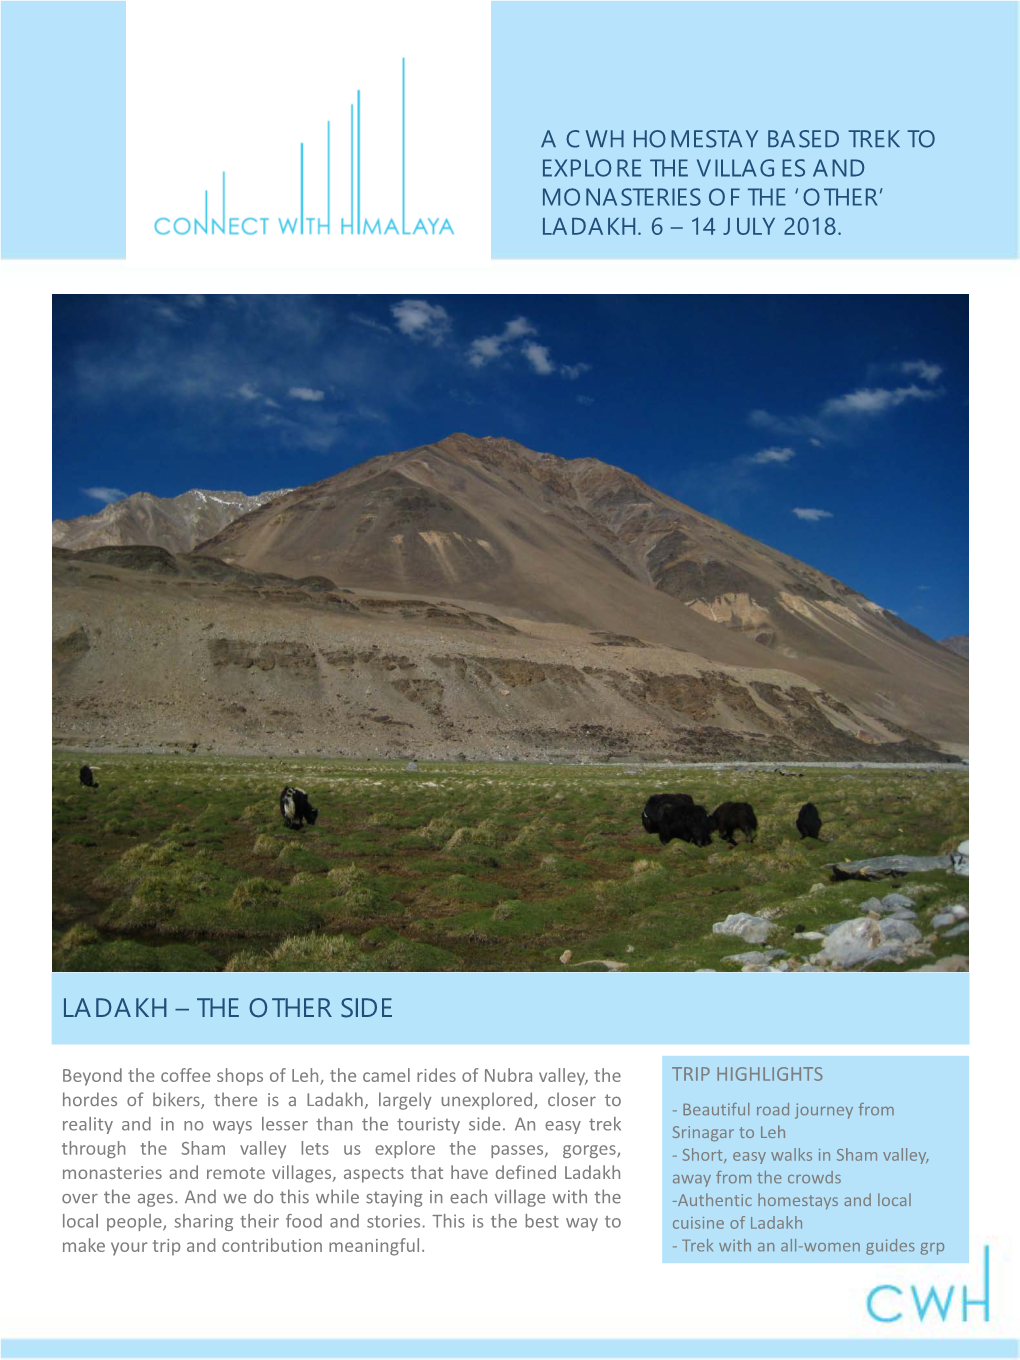 Ladakh – the Other Side